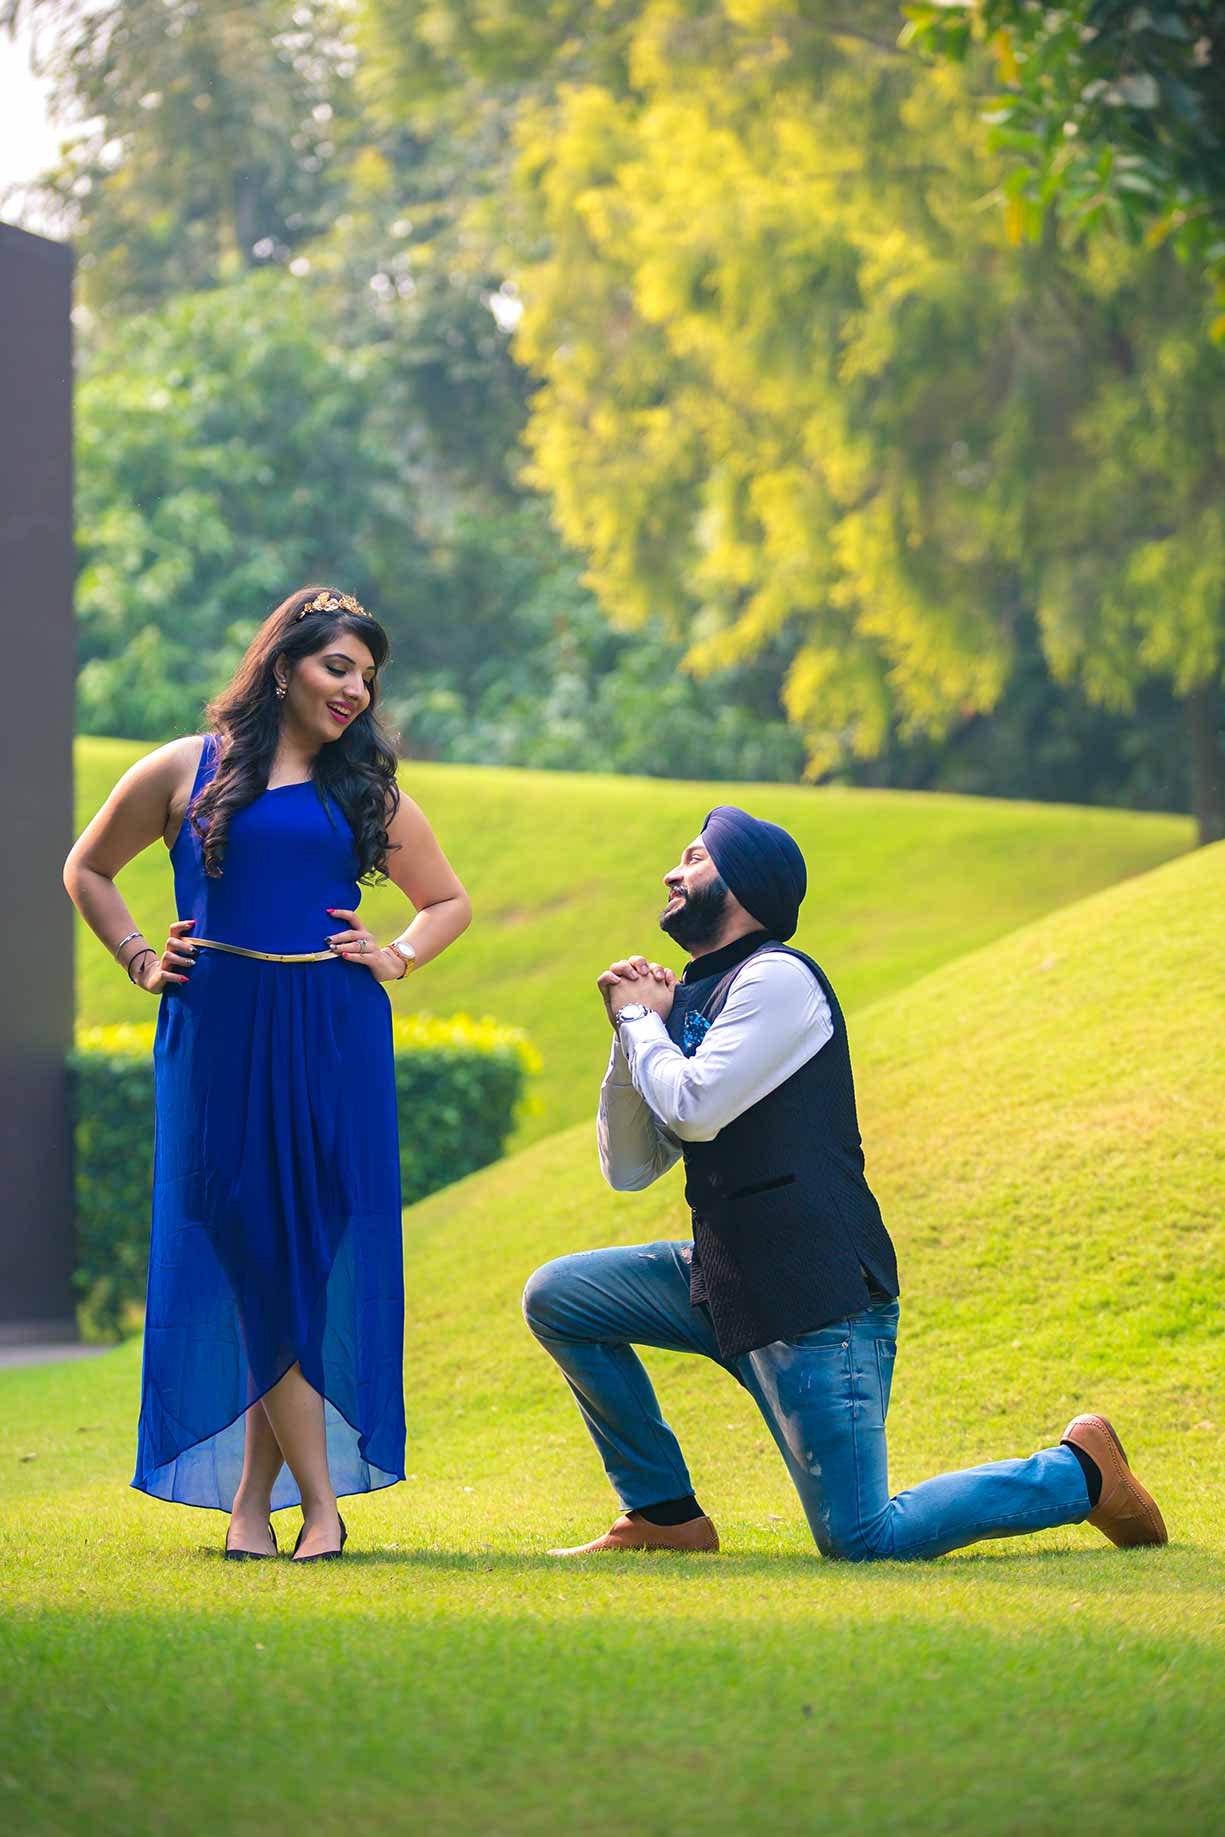 The Best Pre Wedding Photography Ideas In Sahib And Harnoor Photoshoot 4620